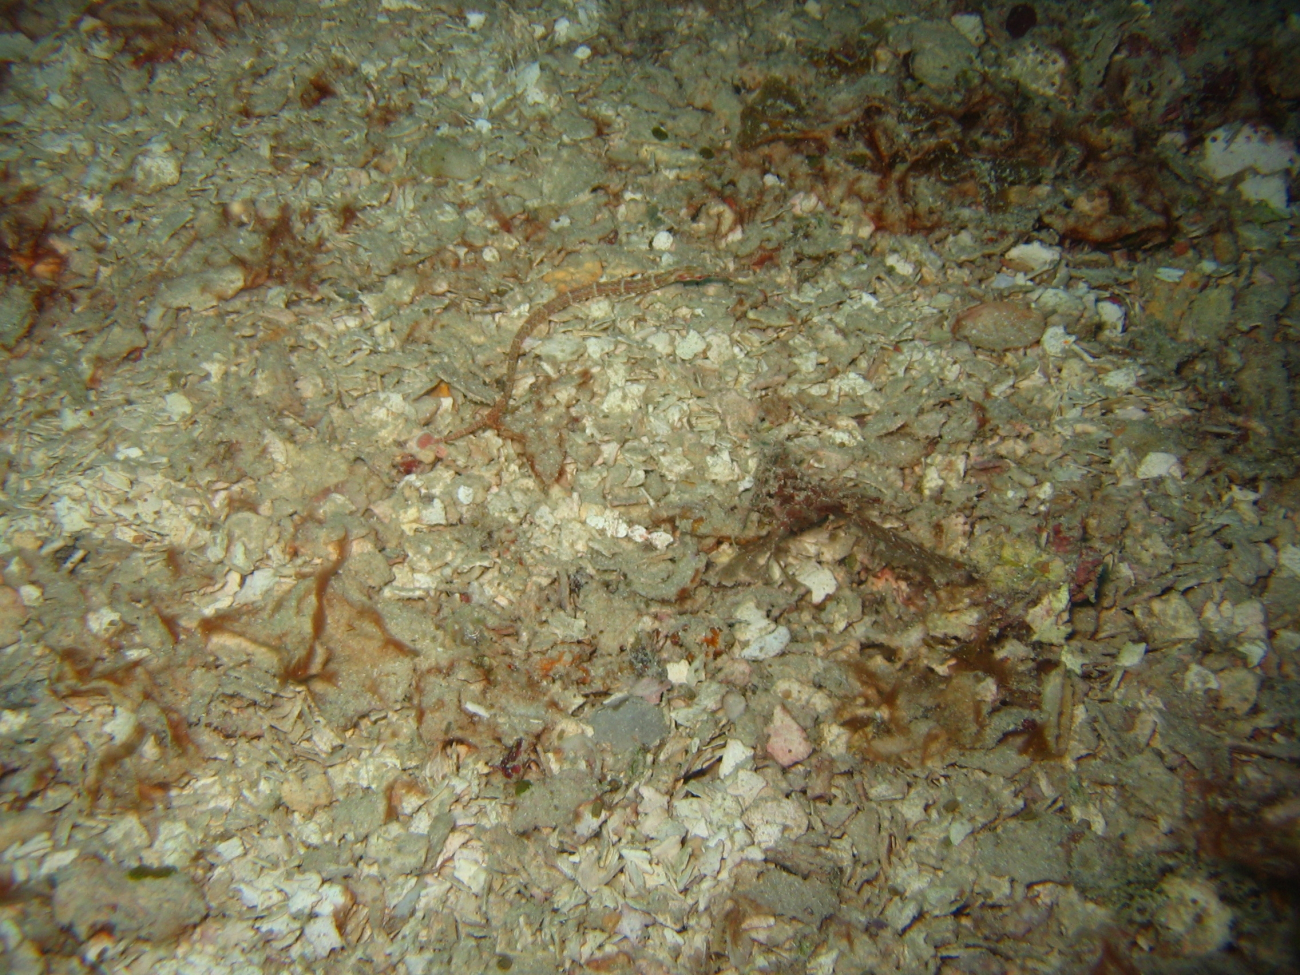 Can you find the pipefish?  There are many species of pipefish which arerelated to seahorses